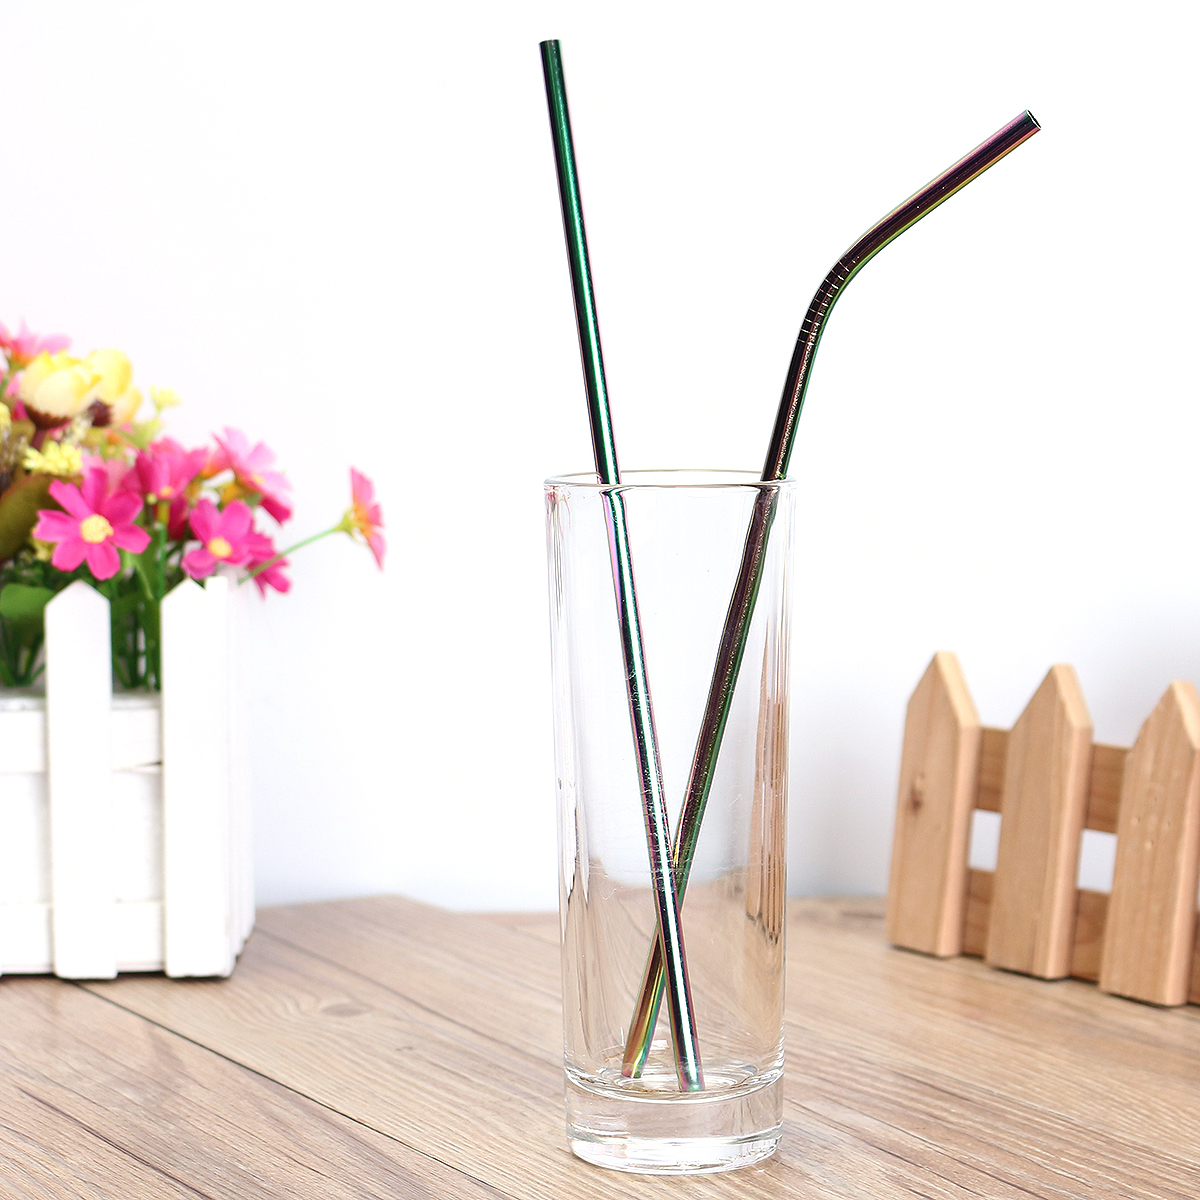 Stainless-Steel-Straw-Set-Long-Metal-Environment-Friendly-Drinking-Straws-Kit-With-2-Brushes-Bag-1311599-4